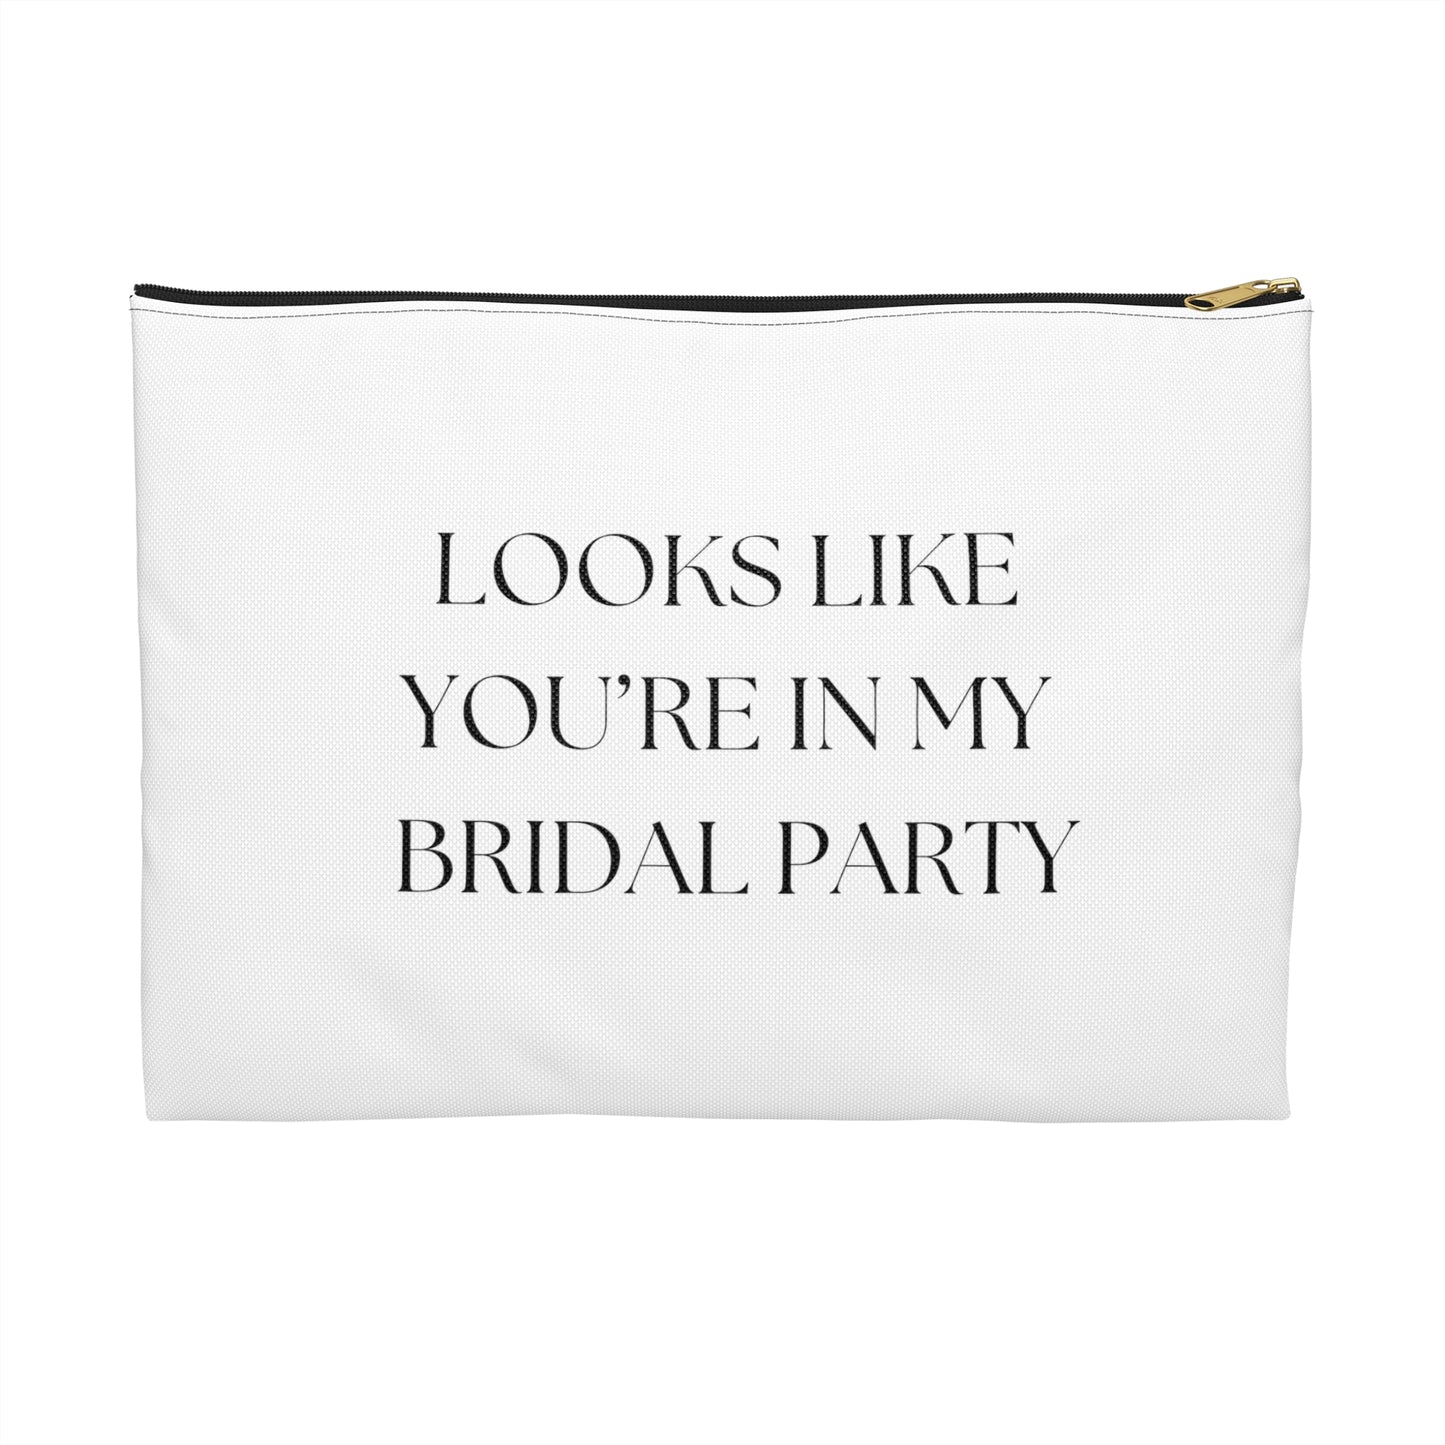 Looks Like You're In My Bridal Party Bag